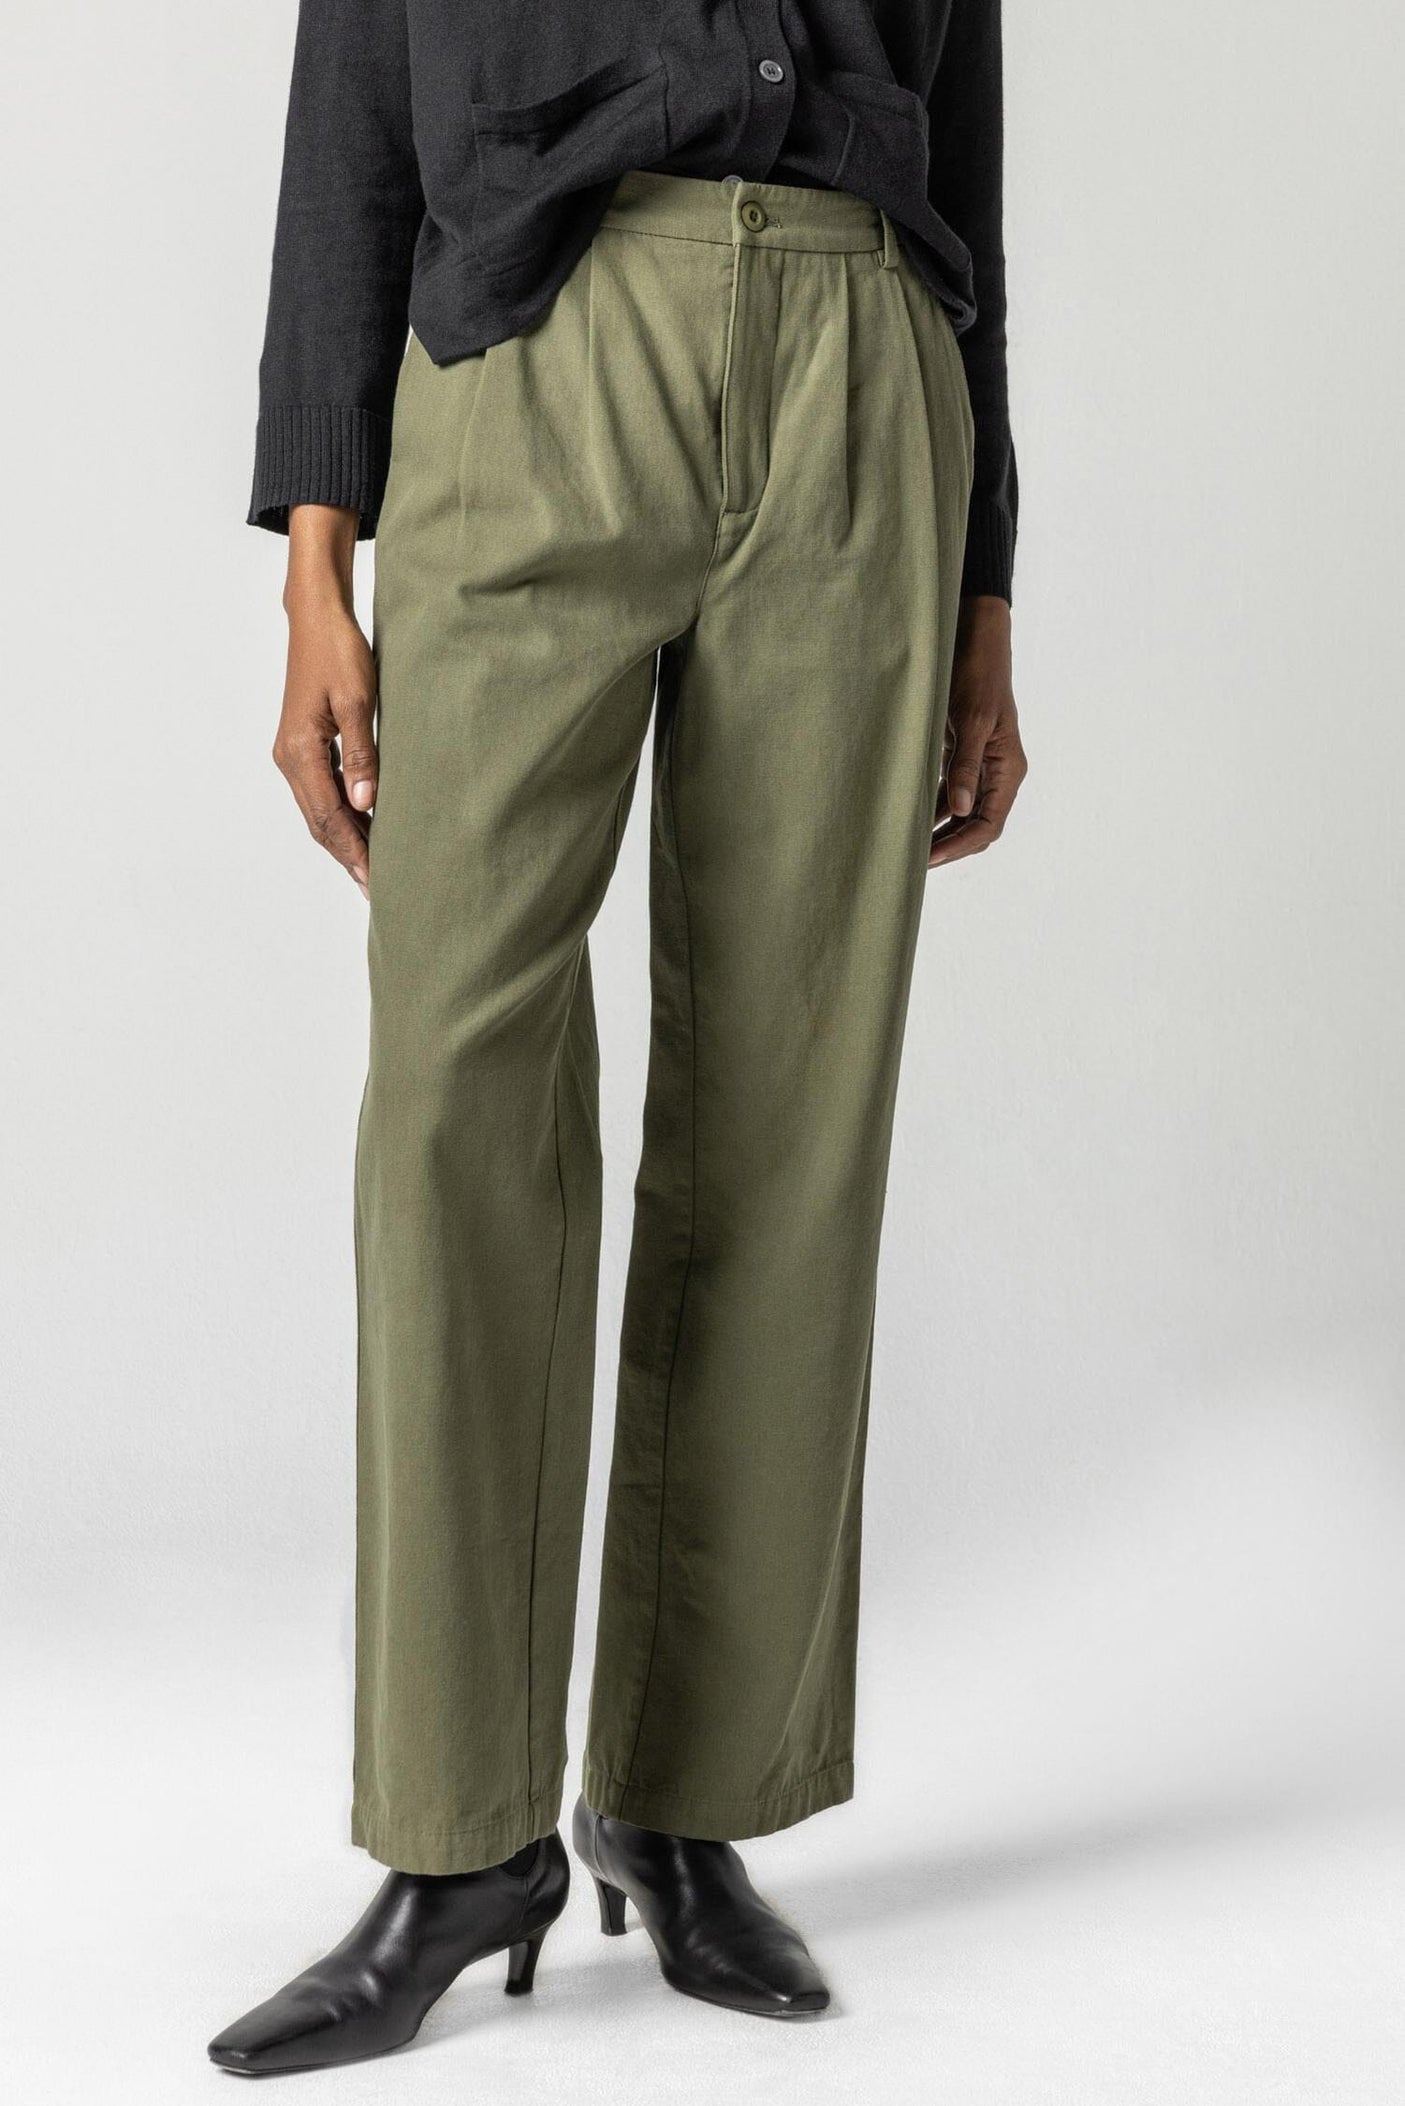 Topshop fold-over waistband detail pleated straight leg pants in camel